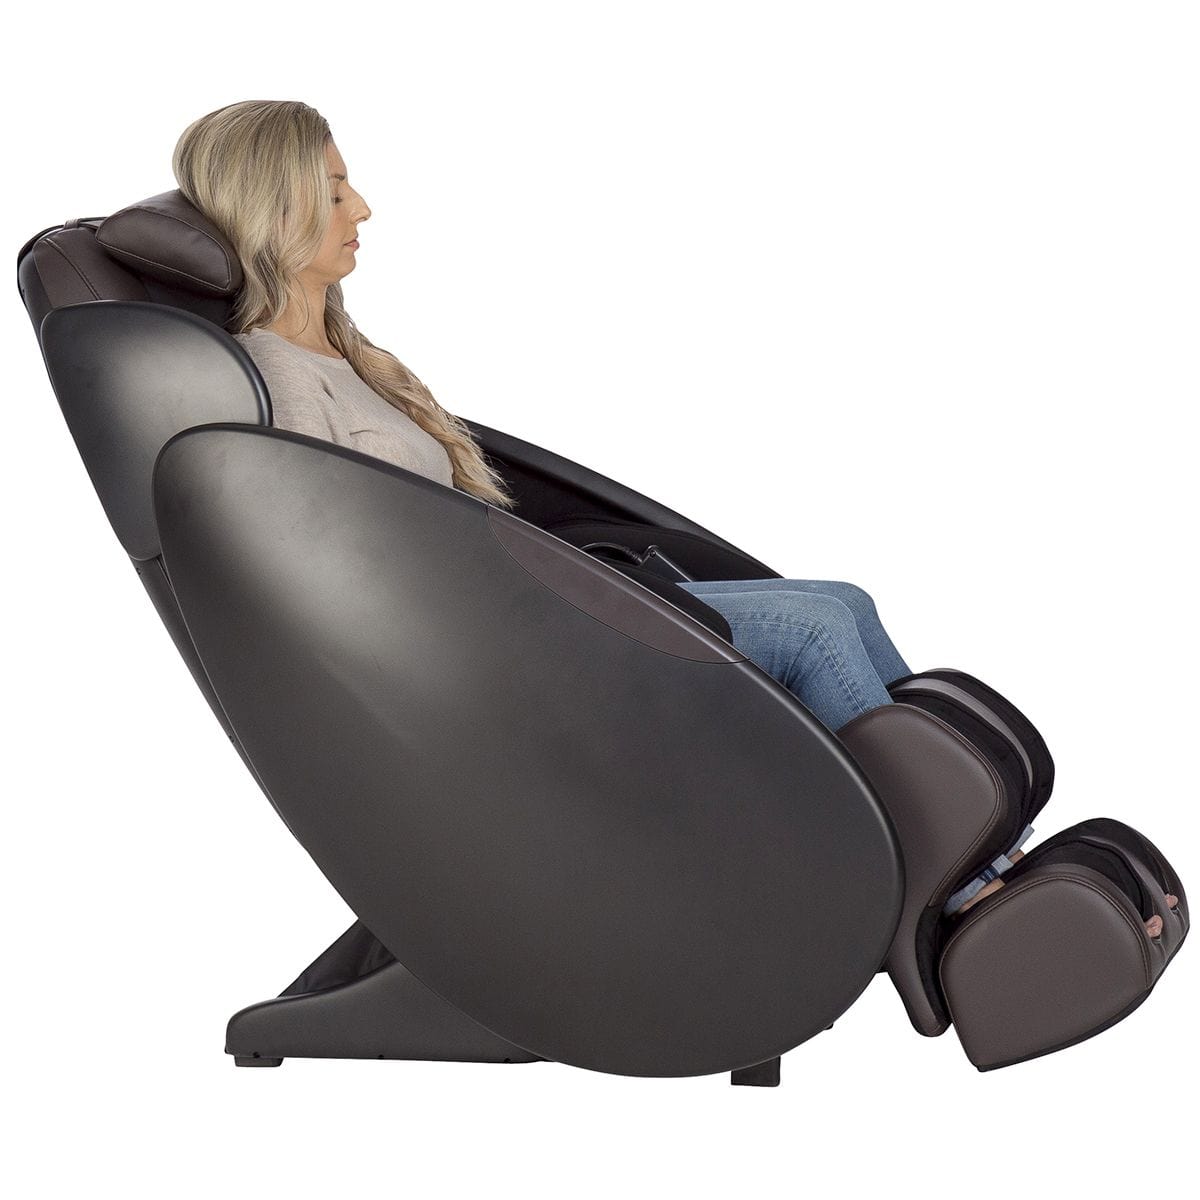 Human TouchMassage ChairHuman Touch iJoy Total Massage ChairBlackMassage Chair Heaven